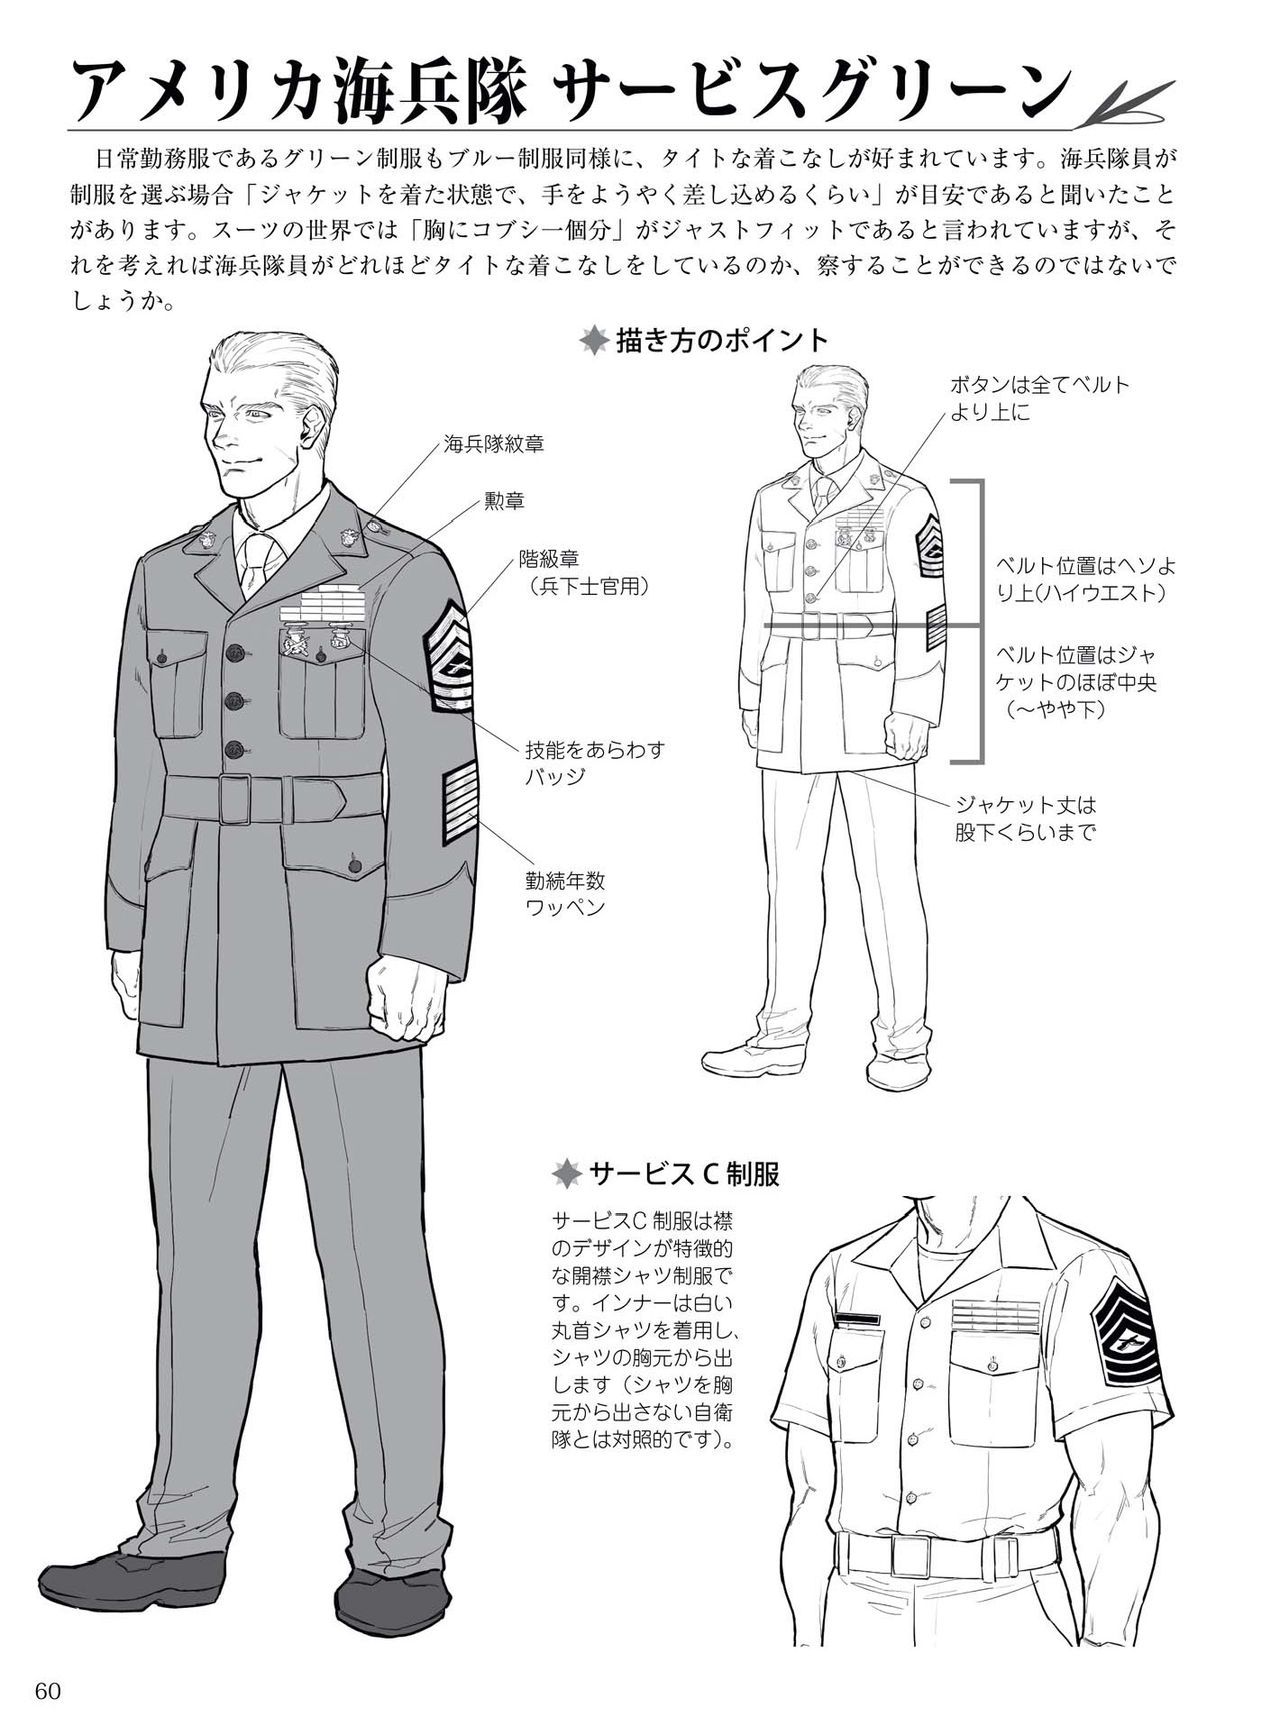 How to draw military uniforms and uniforms From Self-Defense Forces 軍服・制服の描き方 アメリカ軍・自衛隊の制服から戦闘服まで 63